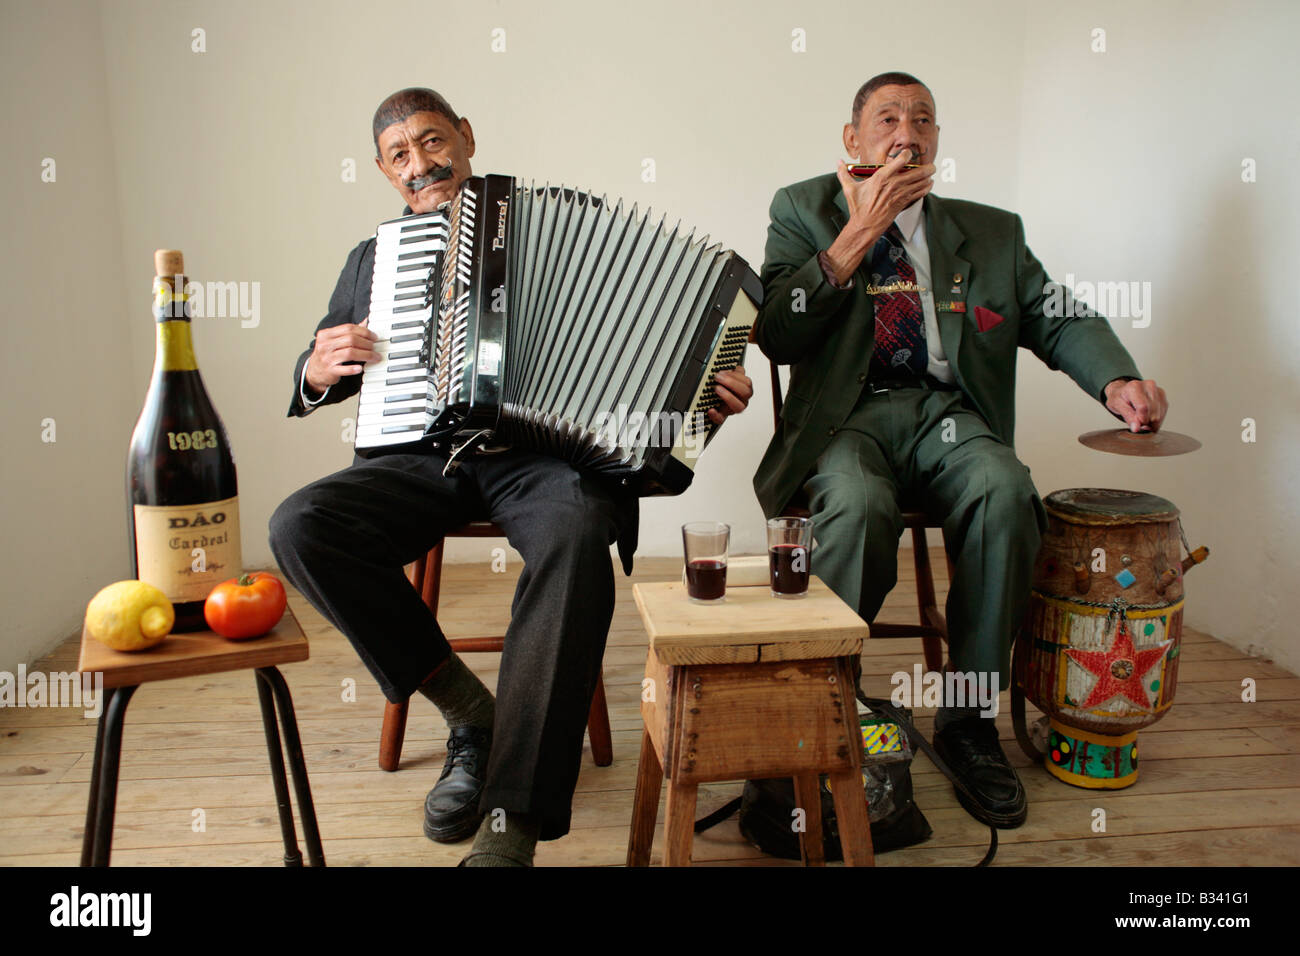 the 73 year old twins Joao and Fernando Nathis like to busk, Lagos, Algarve, Portugal Stock Photo